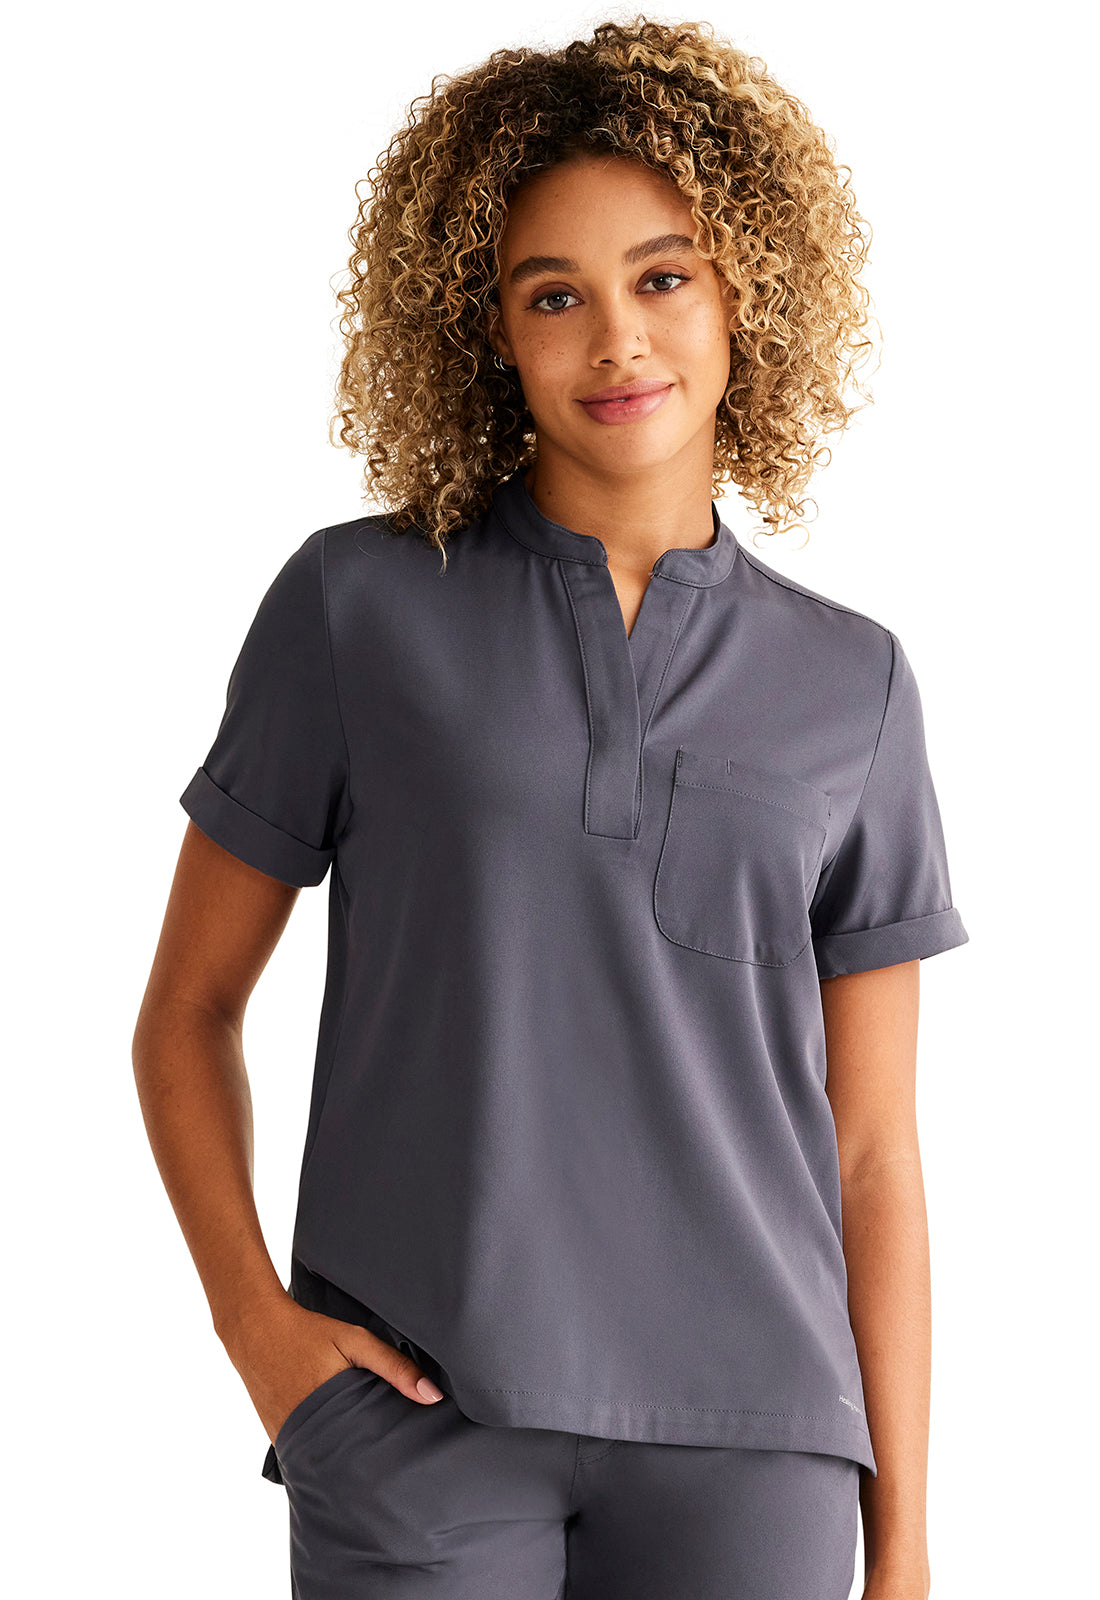 Healing Hands HH Works HH650 Women's Tuckable Scrub Top Pewter